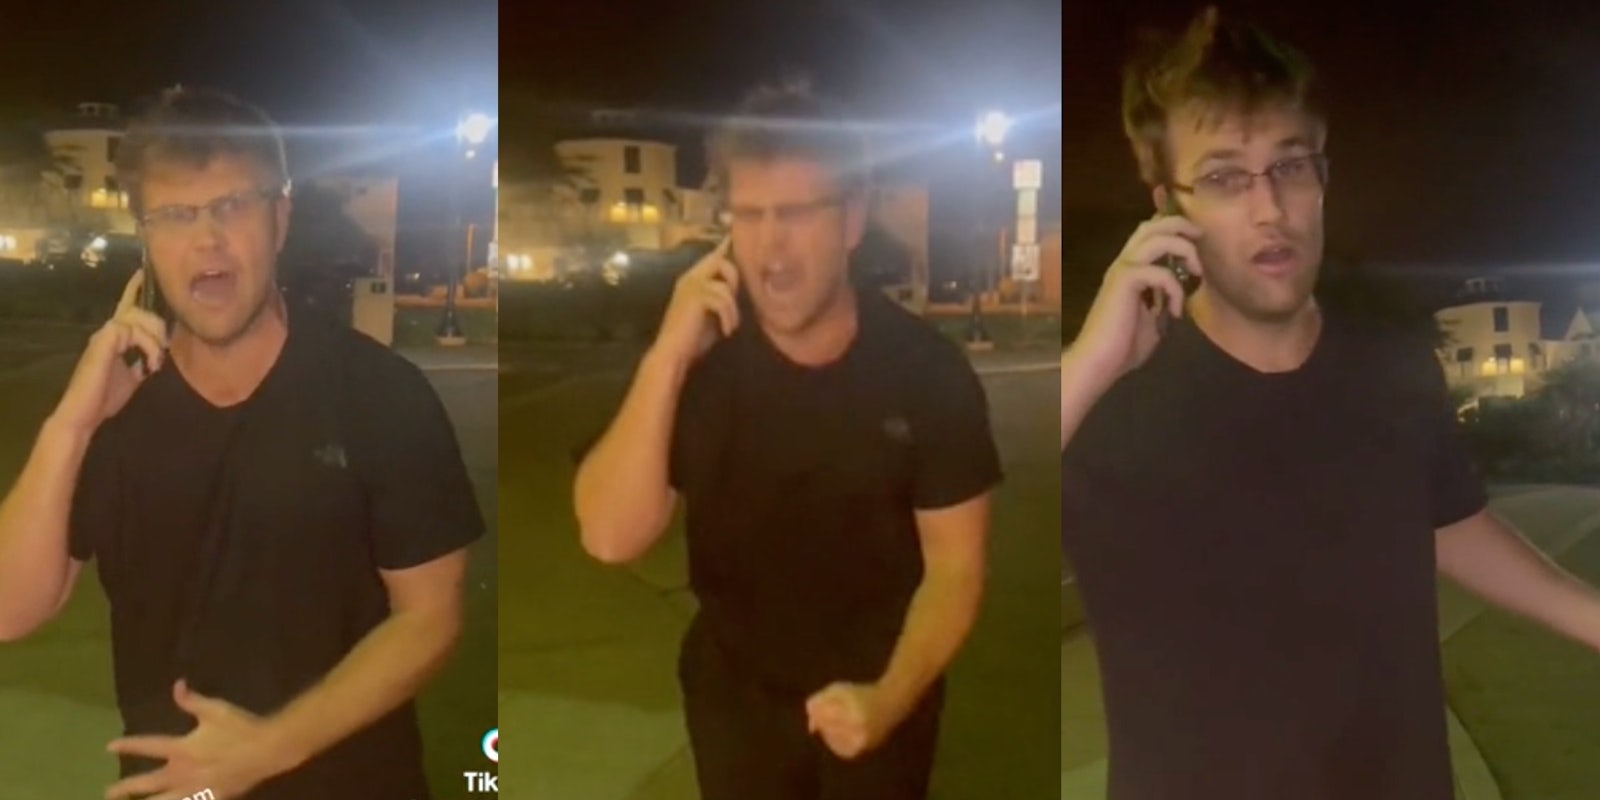 A man screams 'give me a cop' on the phone